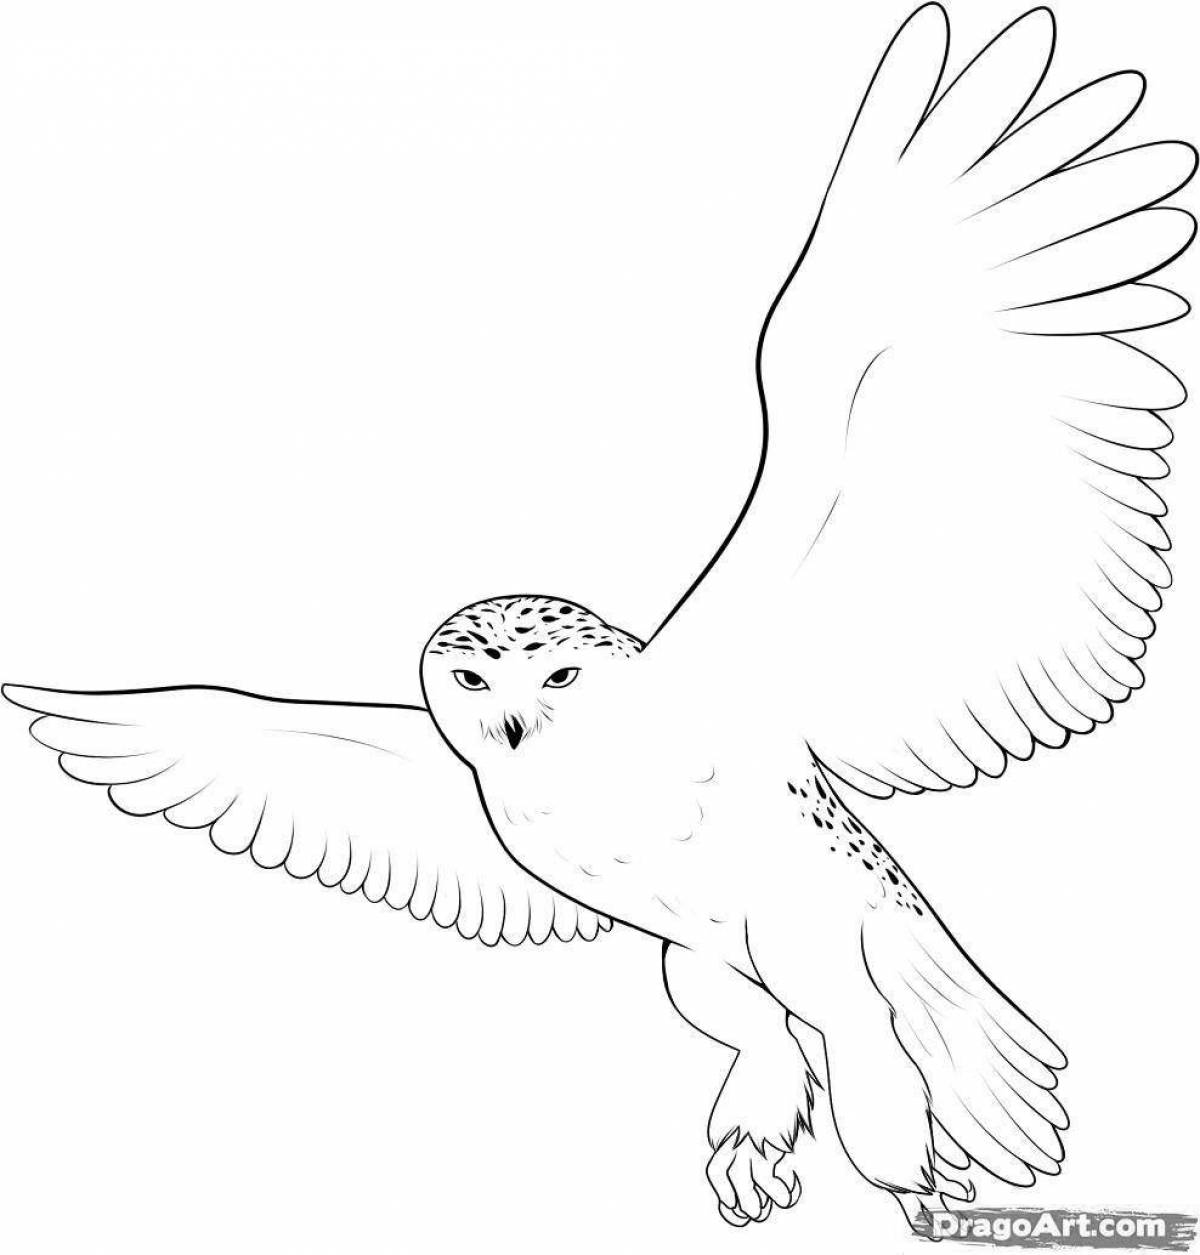 Coloring page elegant snowy owl